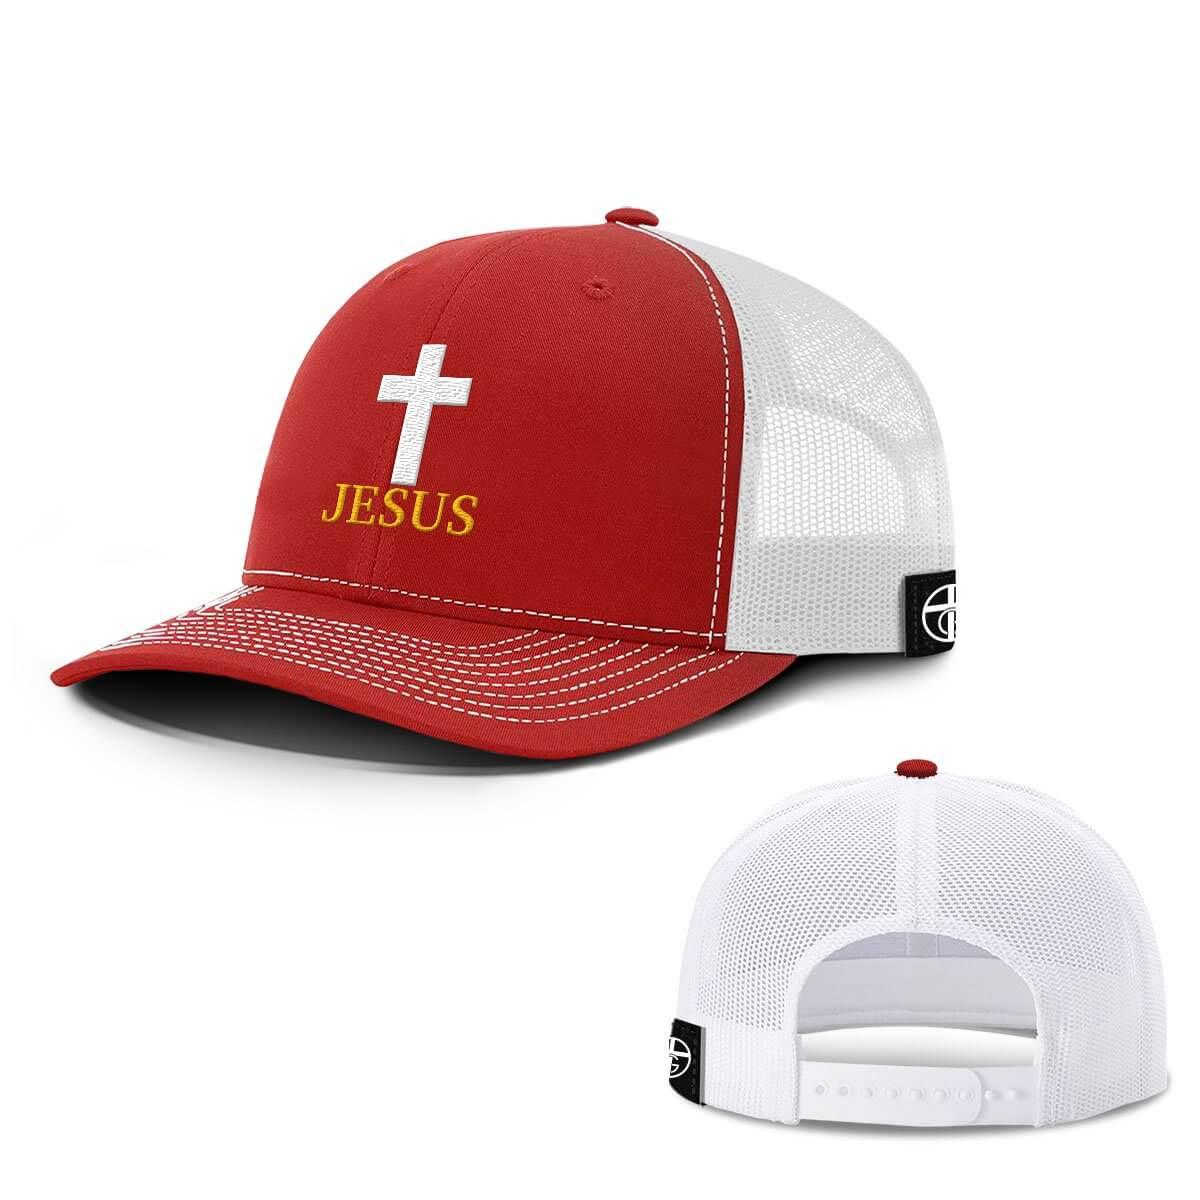 Our True God Christian Hats Nail Cross Flexfit Hat - Baseball Cap for Men and Women Breathable Flex Fit Airmesh Fitted Cap